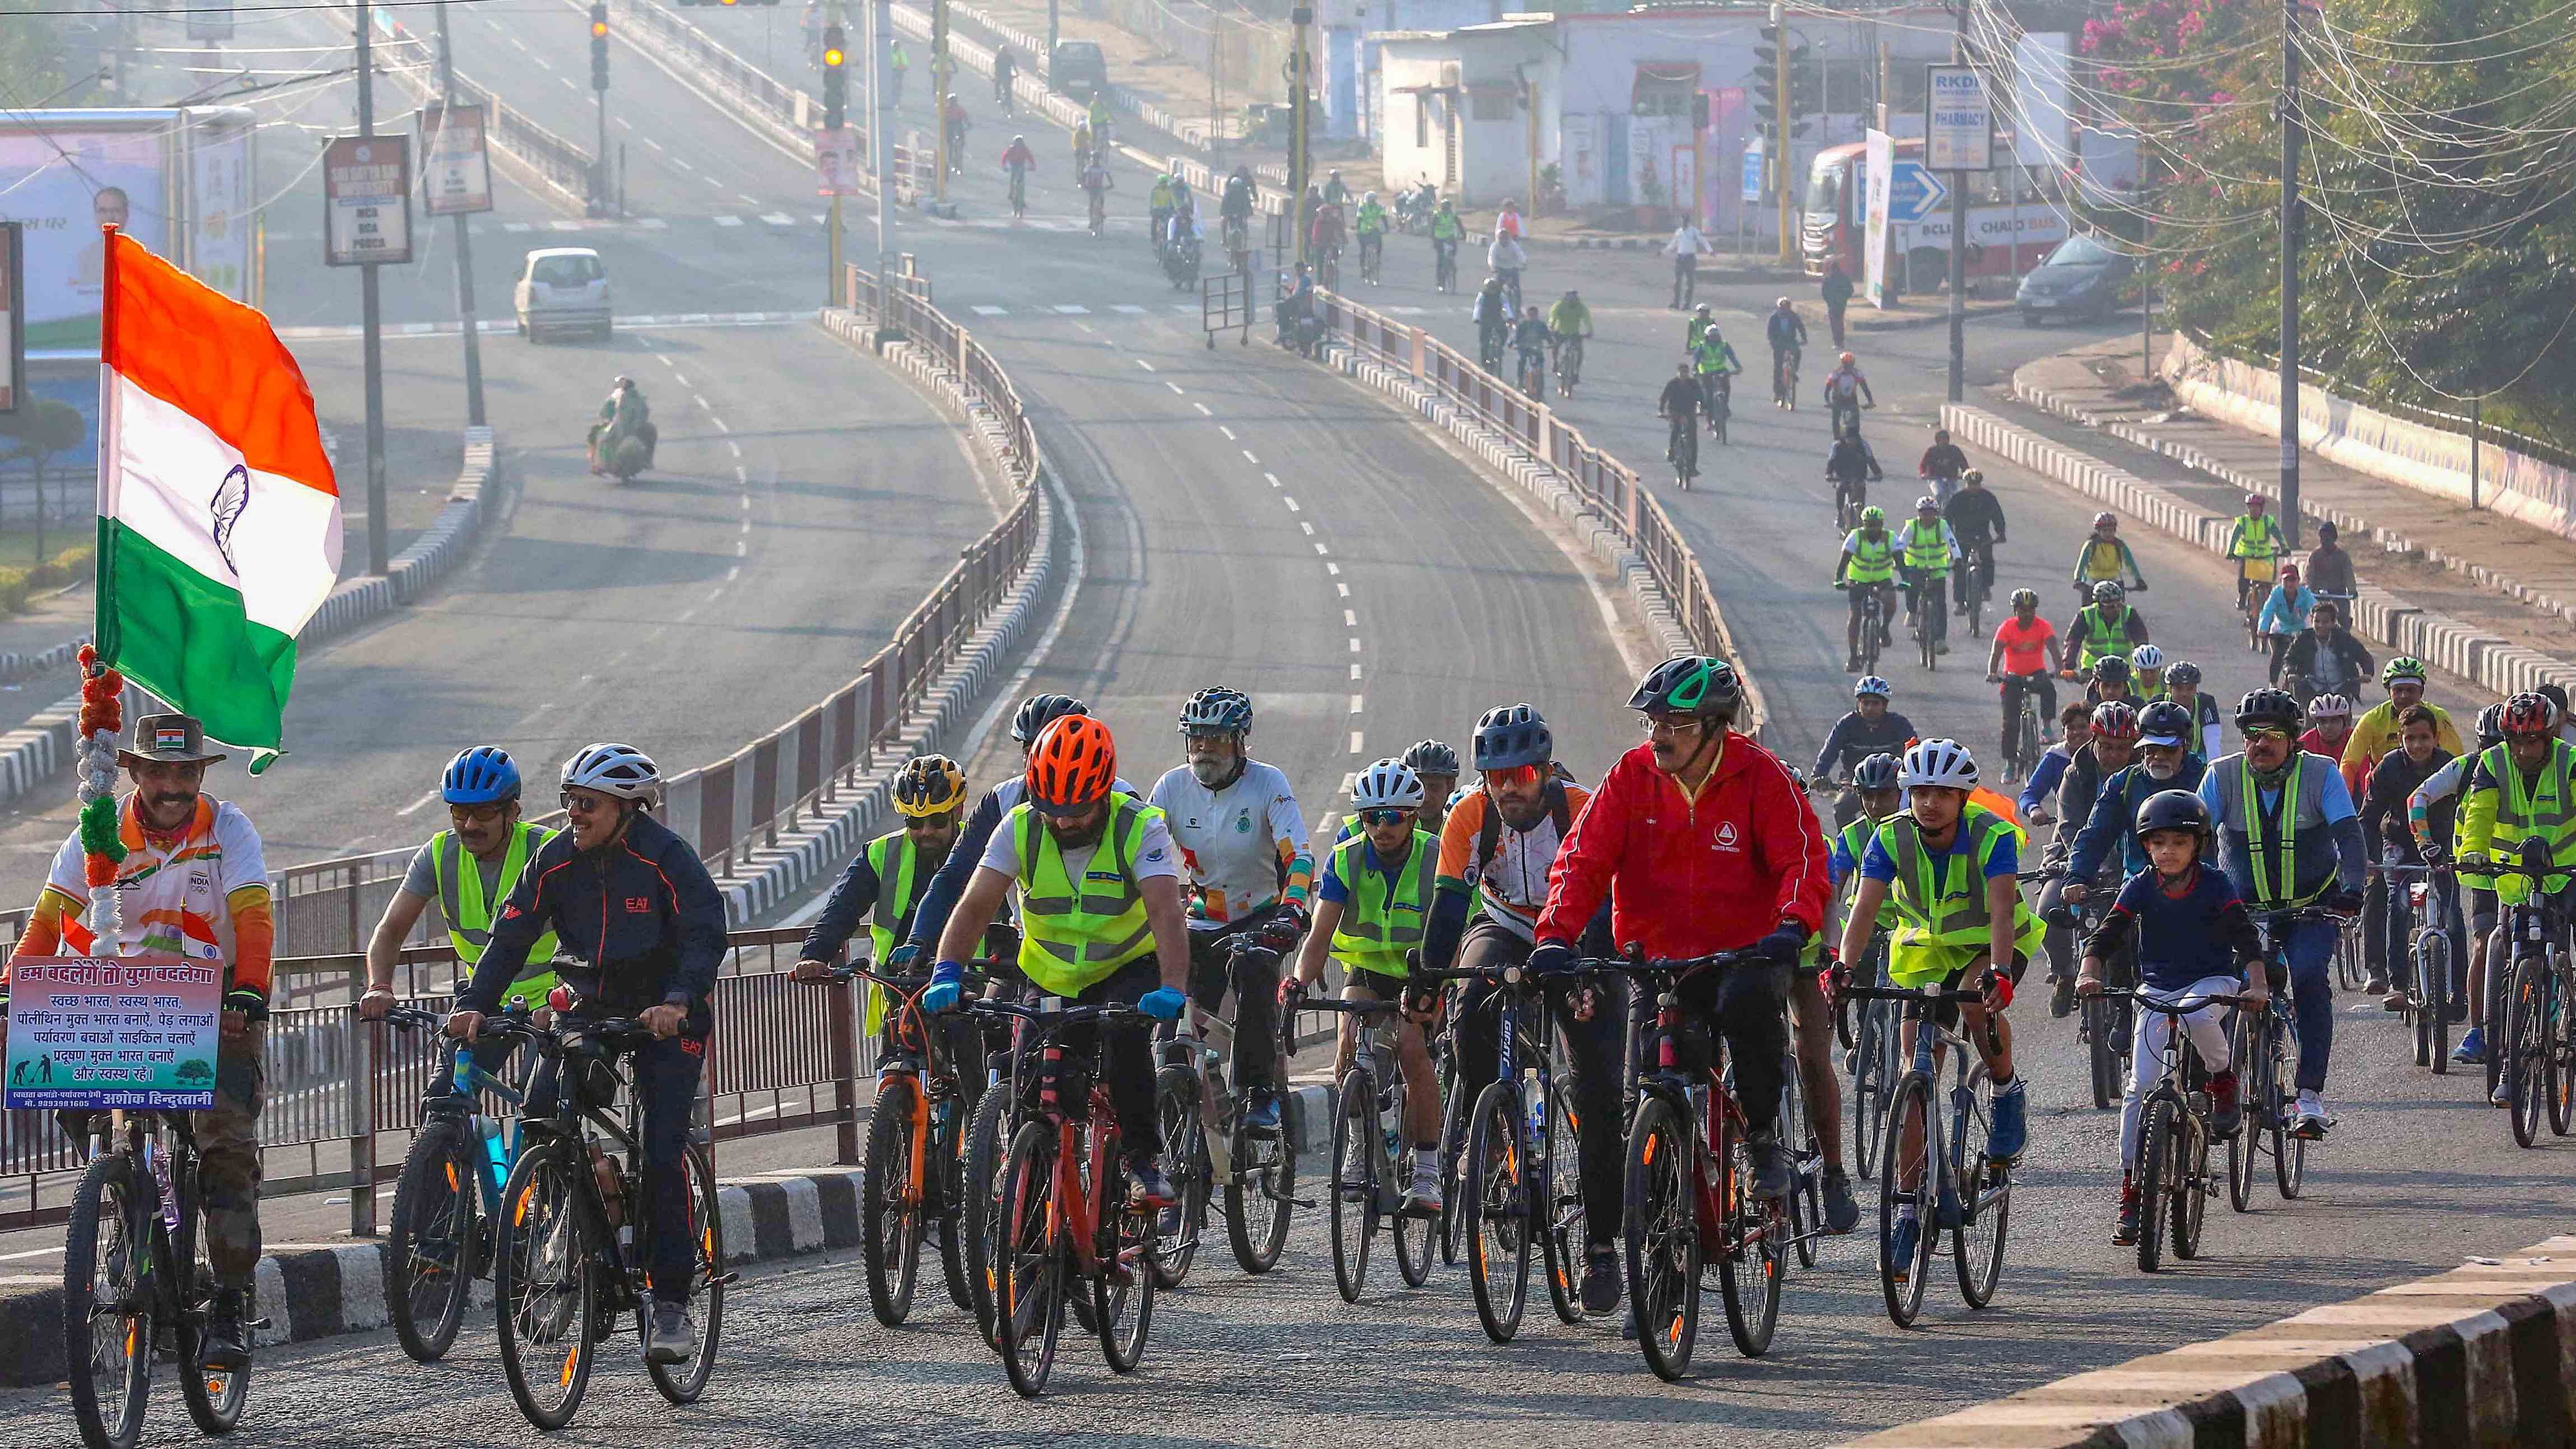 Participants in a bicycle rally ahead of the Khelo India Youth Games-2022, in Bhopal. Credit: PTI Photo